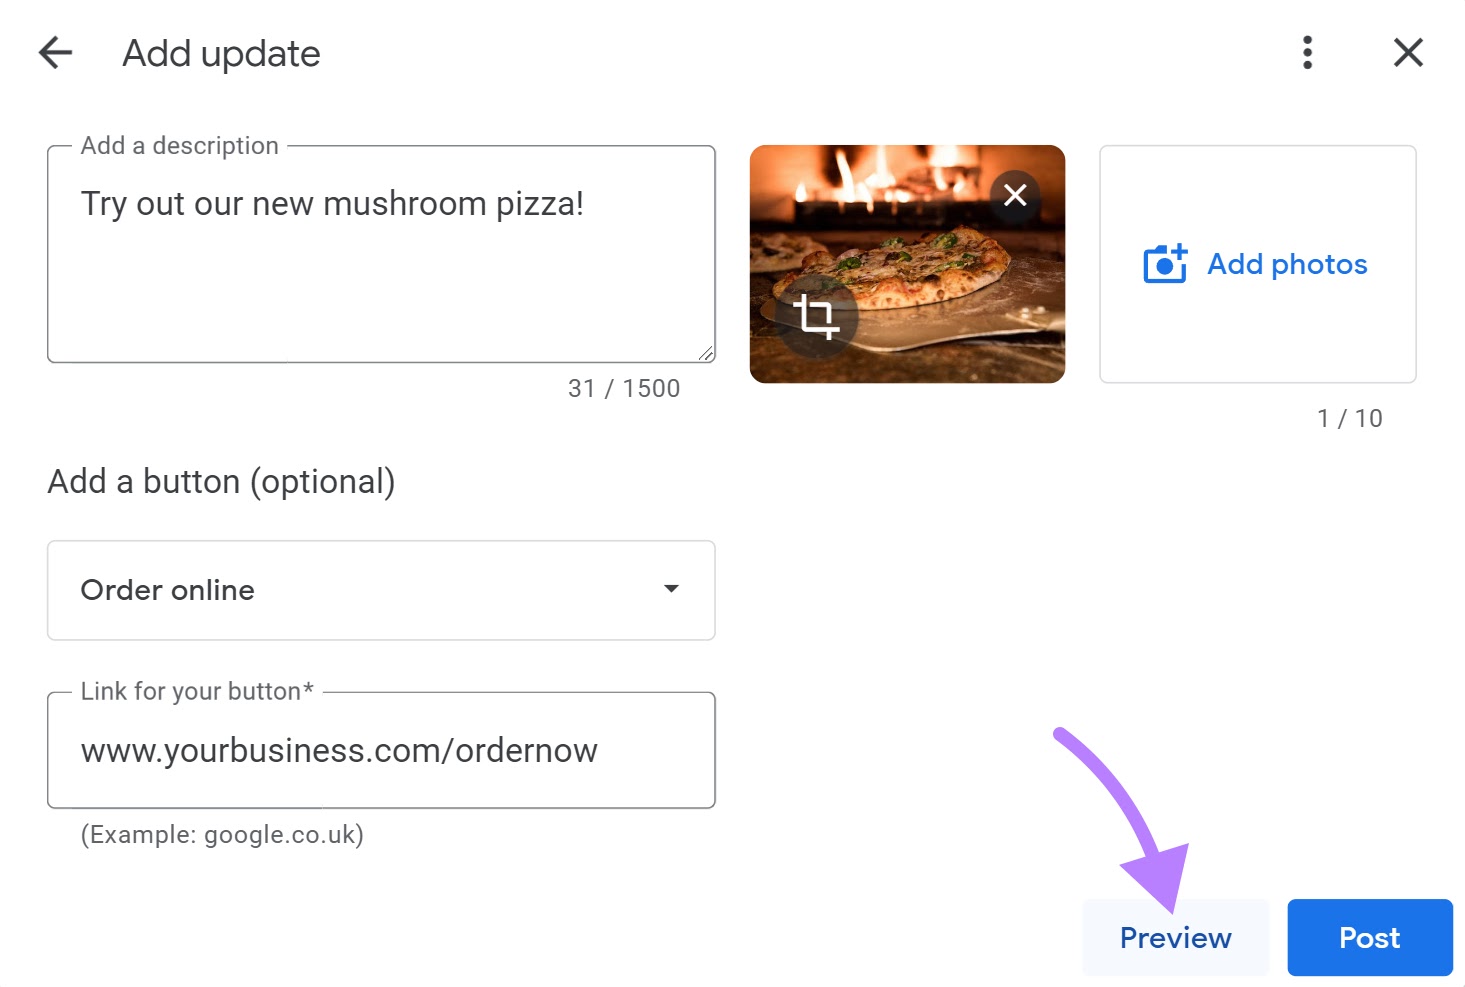 Preview your Google My Business update post